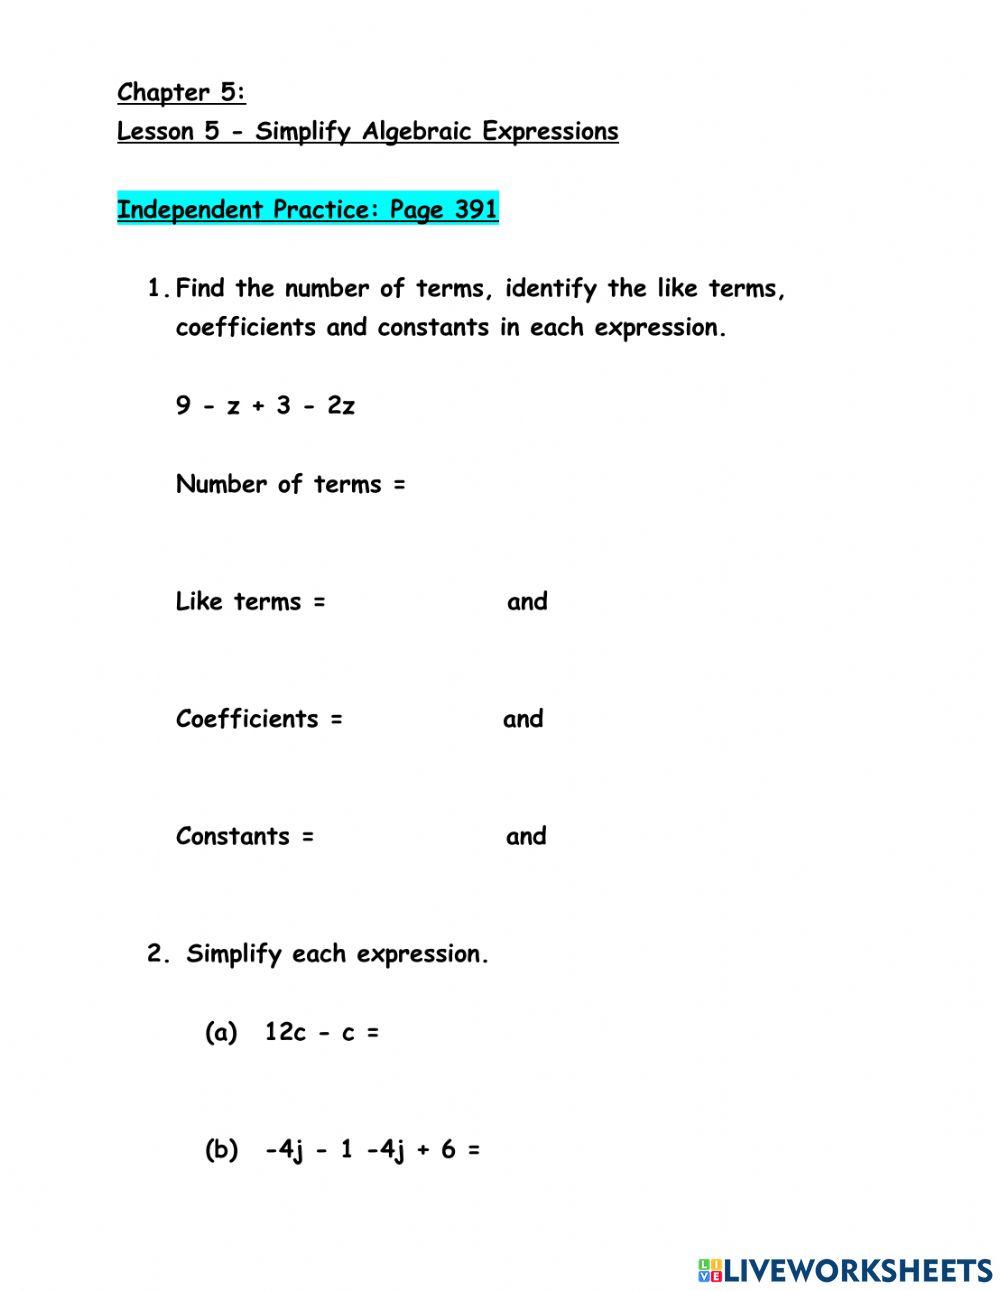 Chapter 5 Lesson 5 Simplify Algebraic Expressions